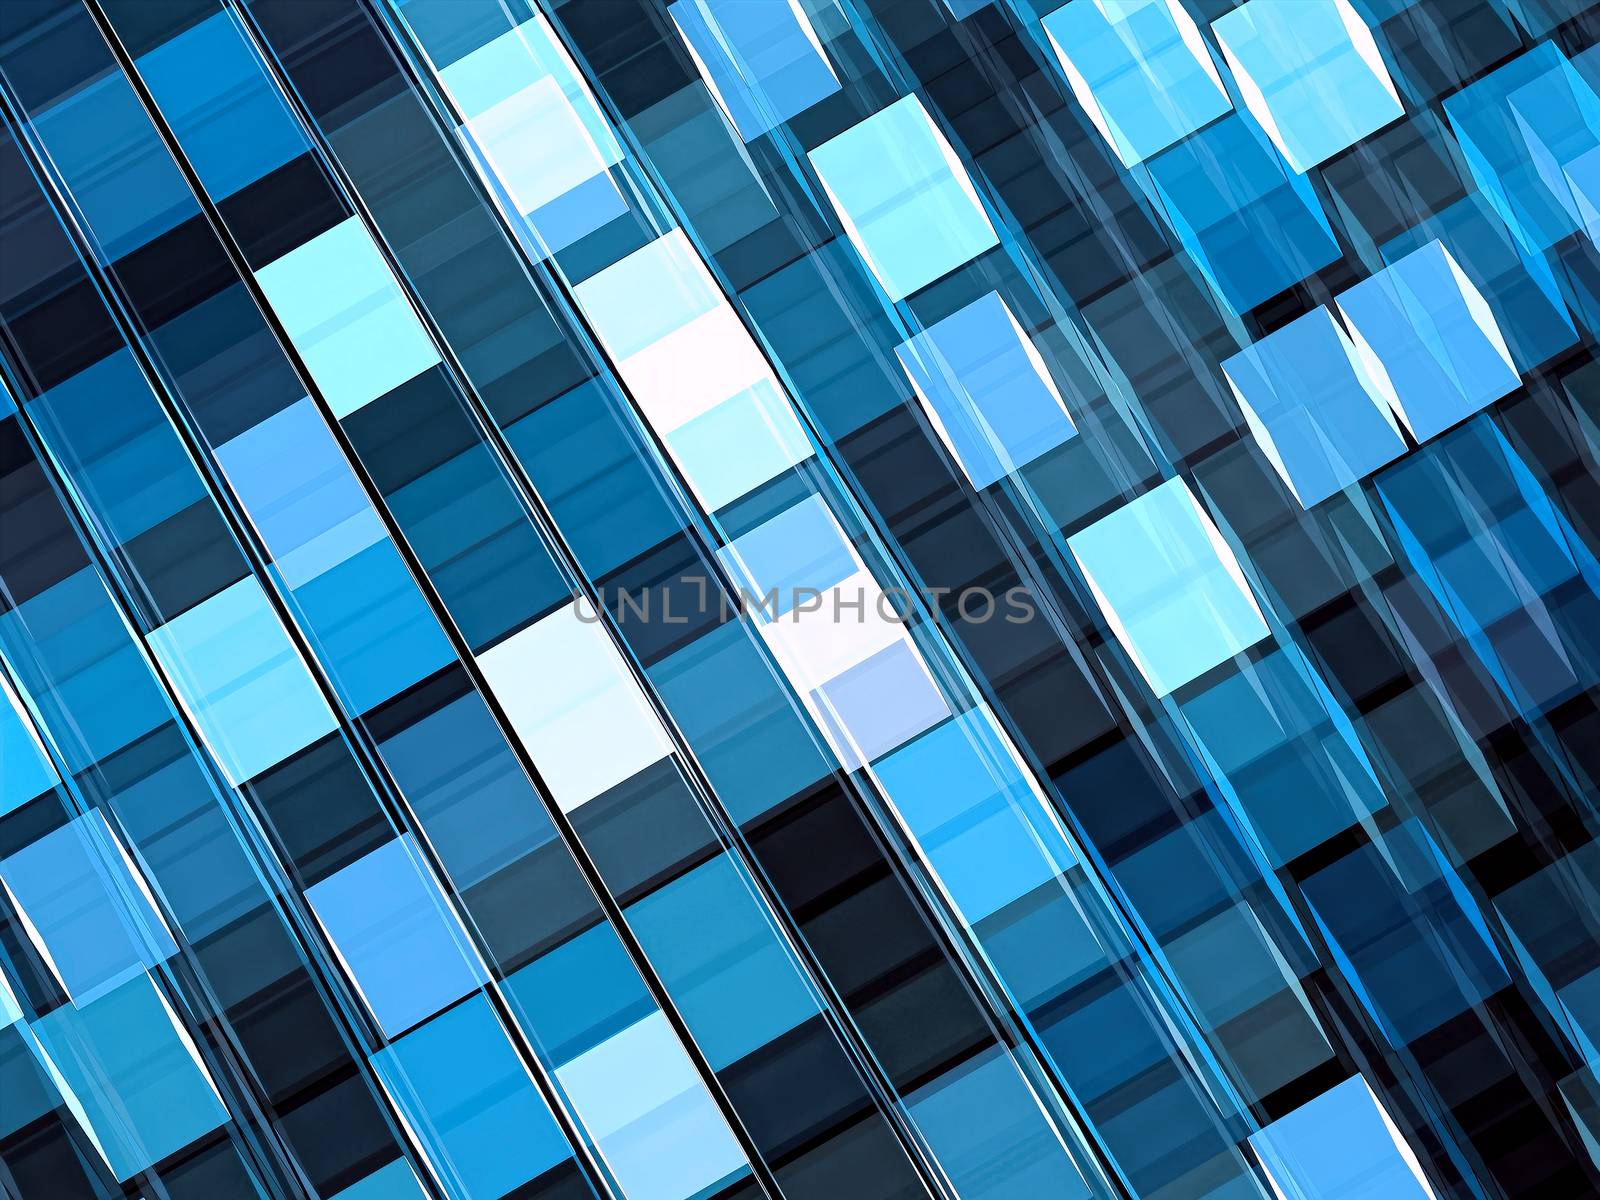 Technology background - abstract digitally generated image by olgasalt